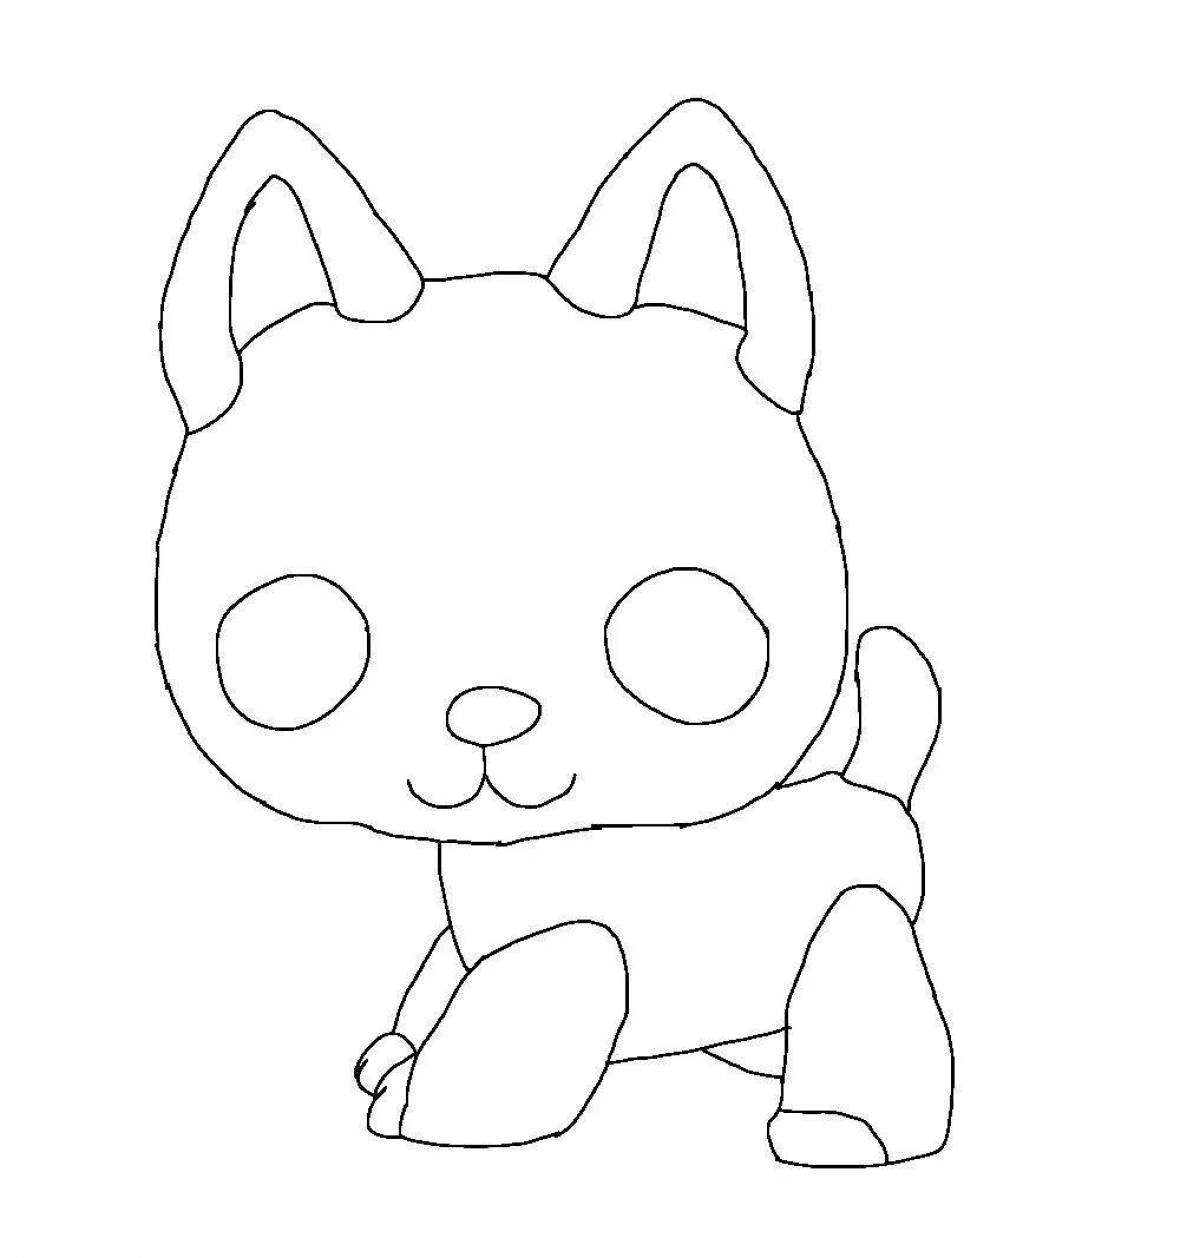 Coloring page festive cat toy